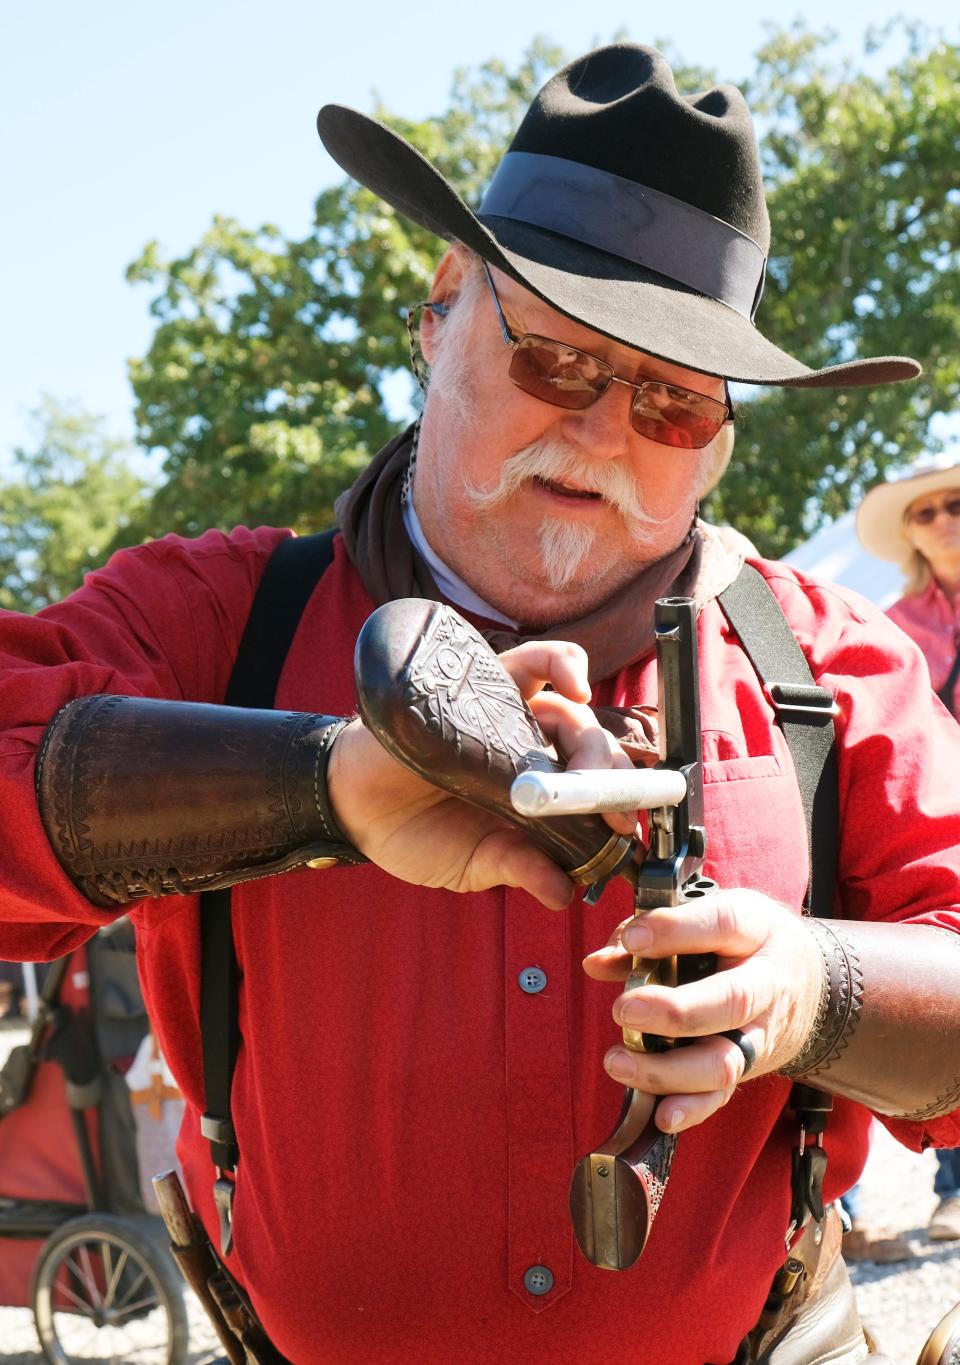 Jimmy Dokey, "Yosemite Jim," of Hawley, Texas, reloads his black powder pistol before a competition on Friday, Oct. 14, 2022, at the Oklahoma City Gun Club. The cowboy action shooting national championship was held at the gun club this year.